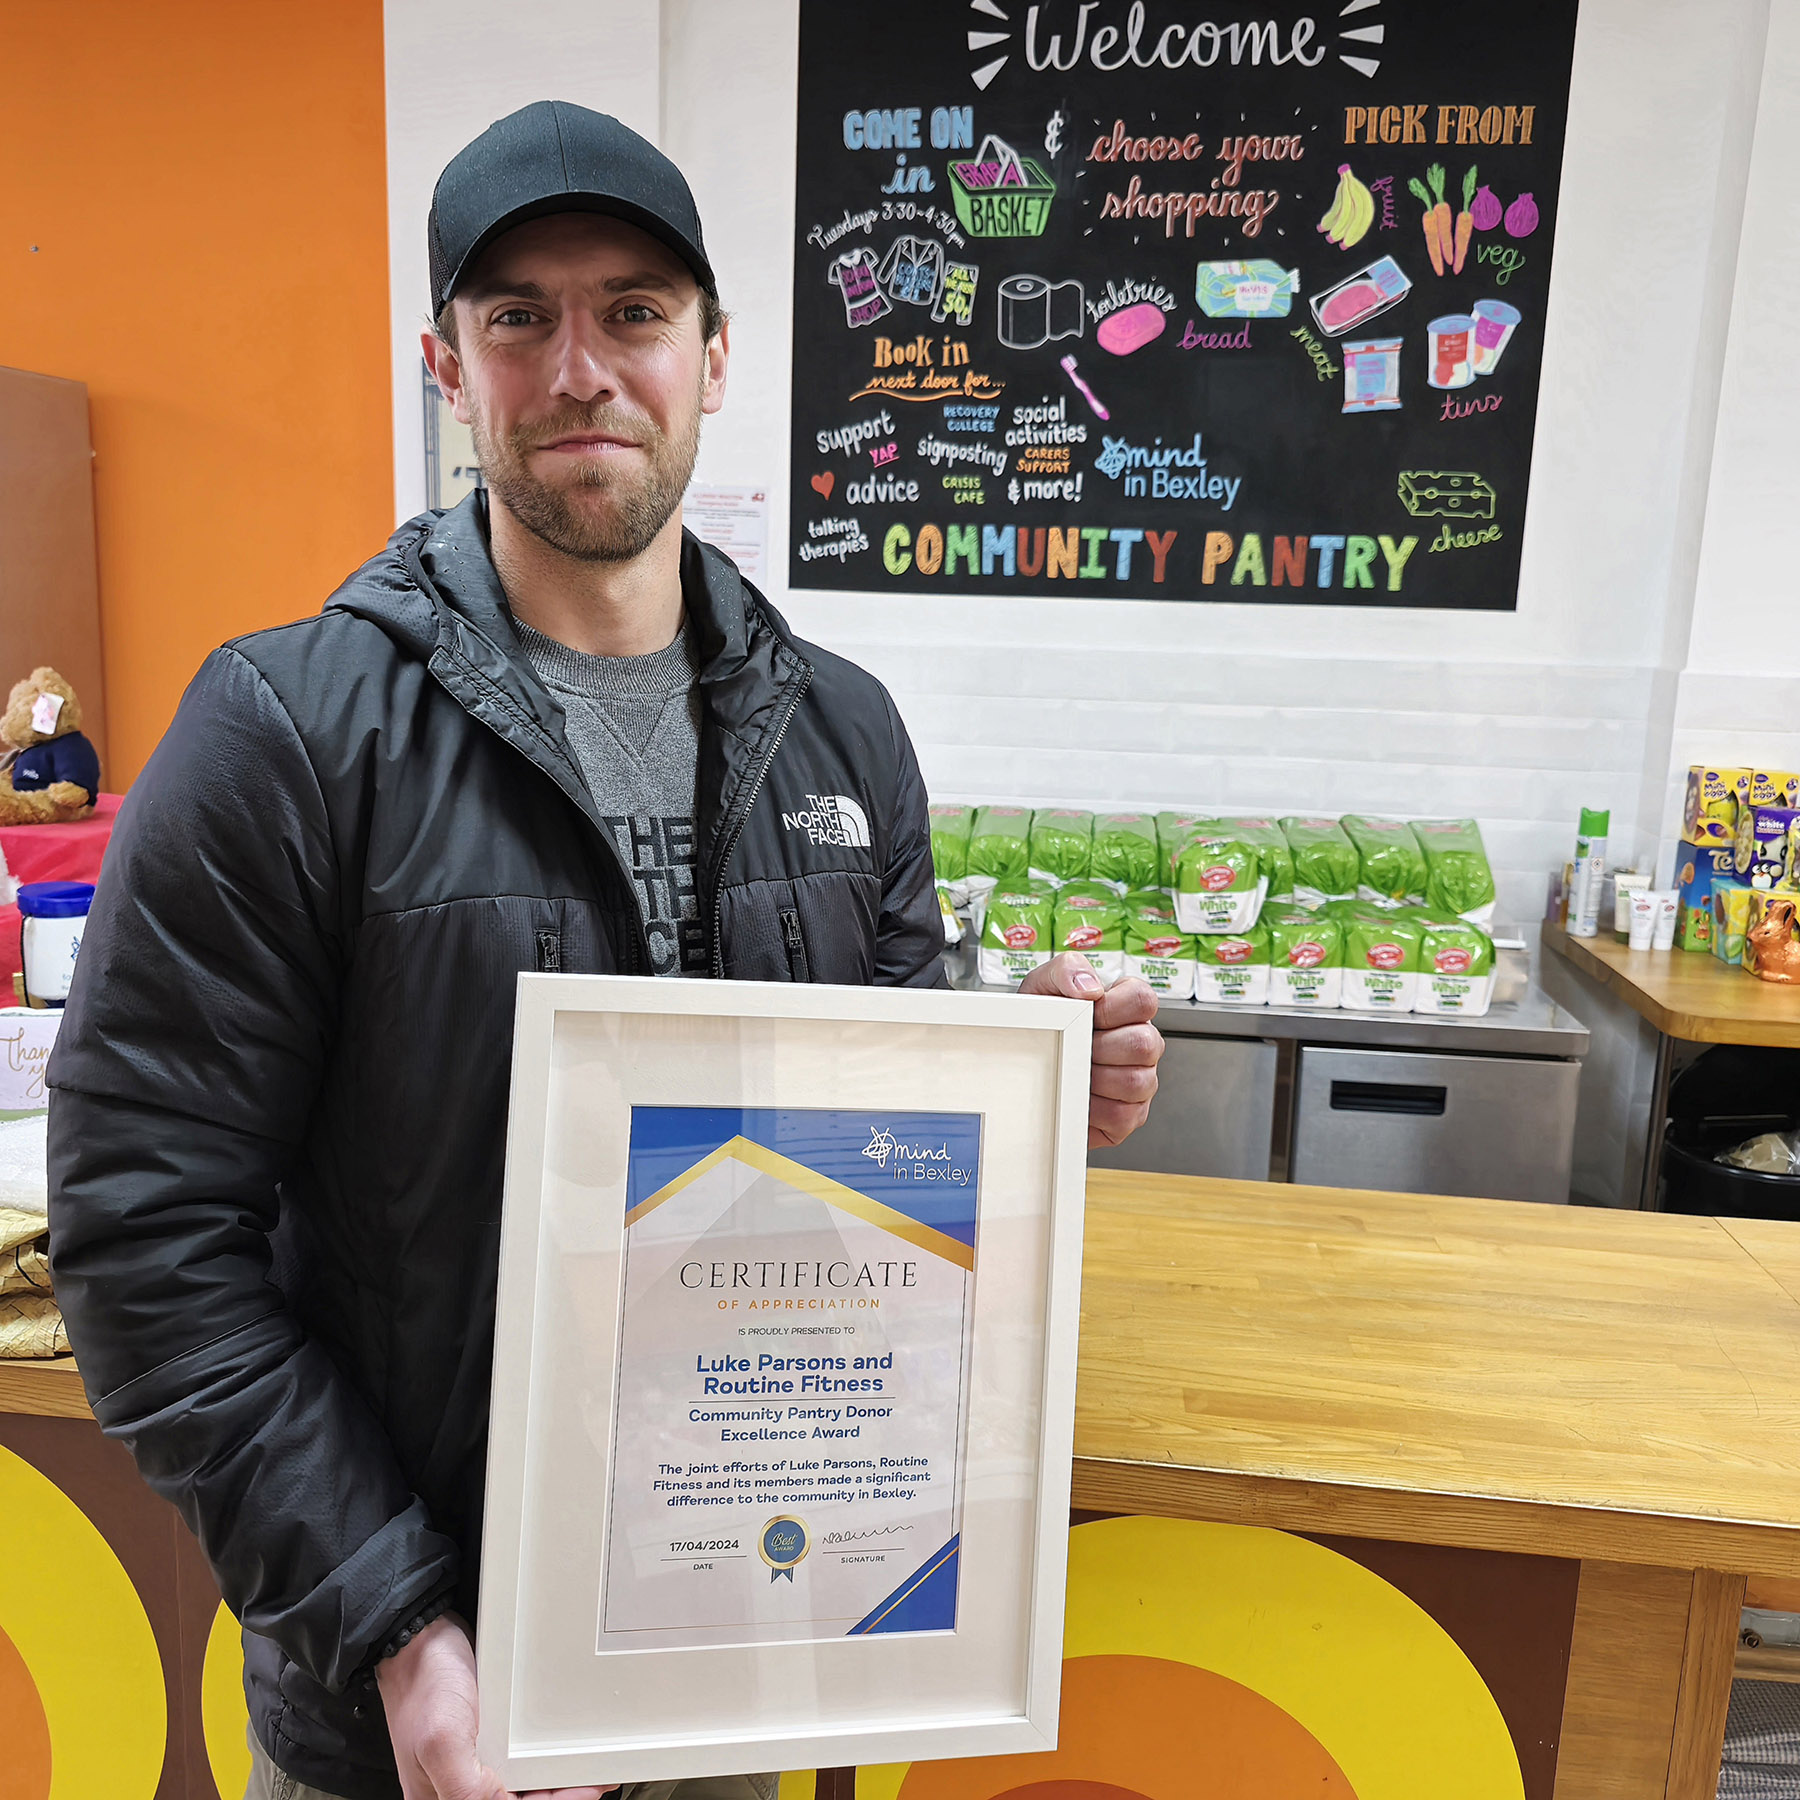 Luke Parsons from Routine Fitness pictured with his award certificate